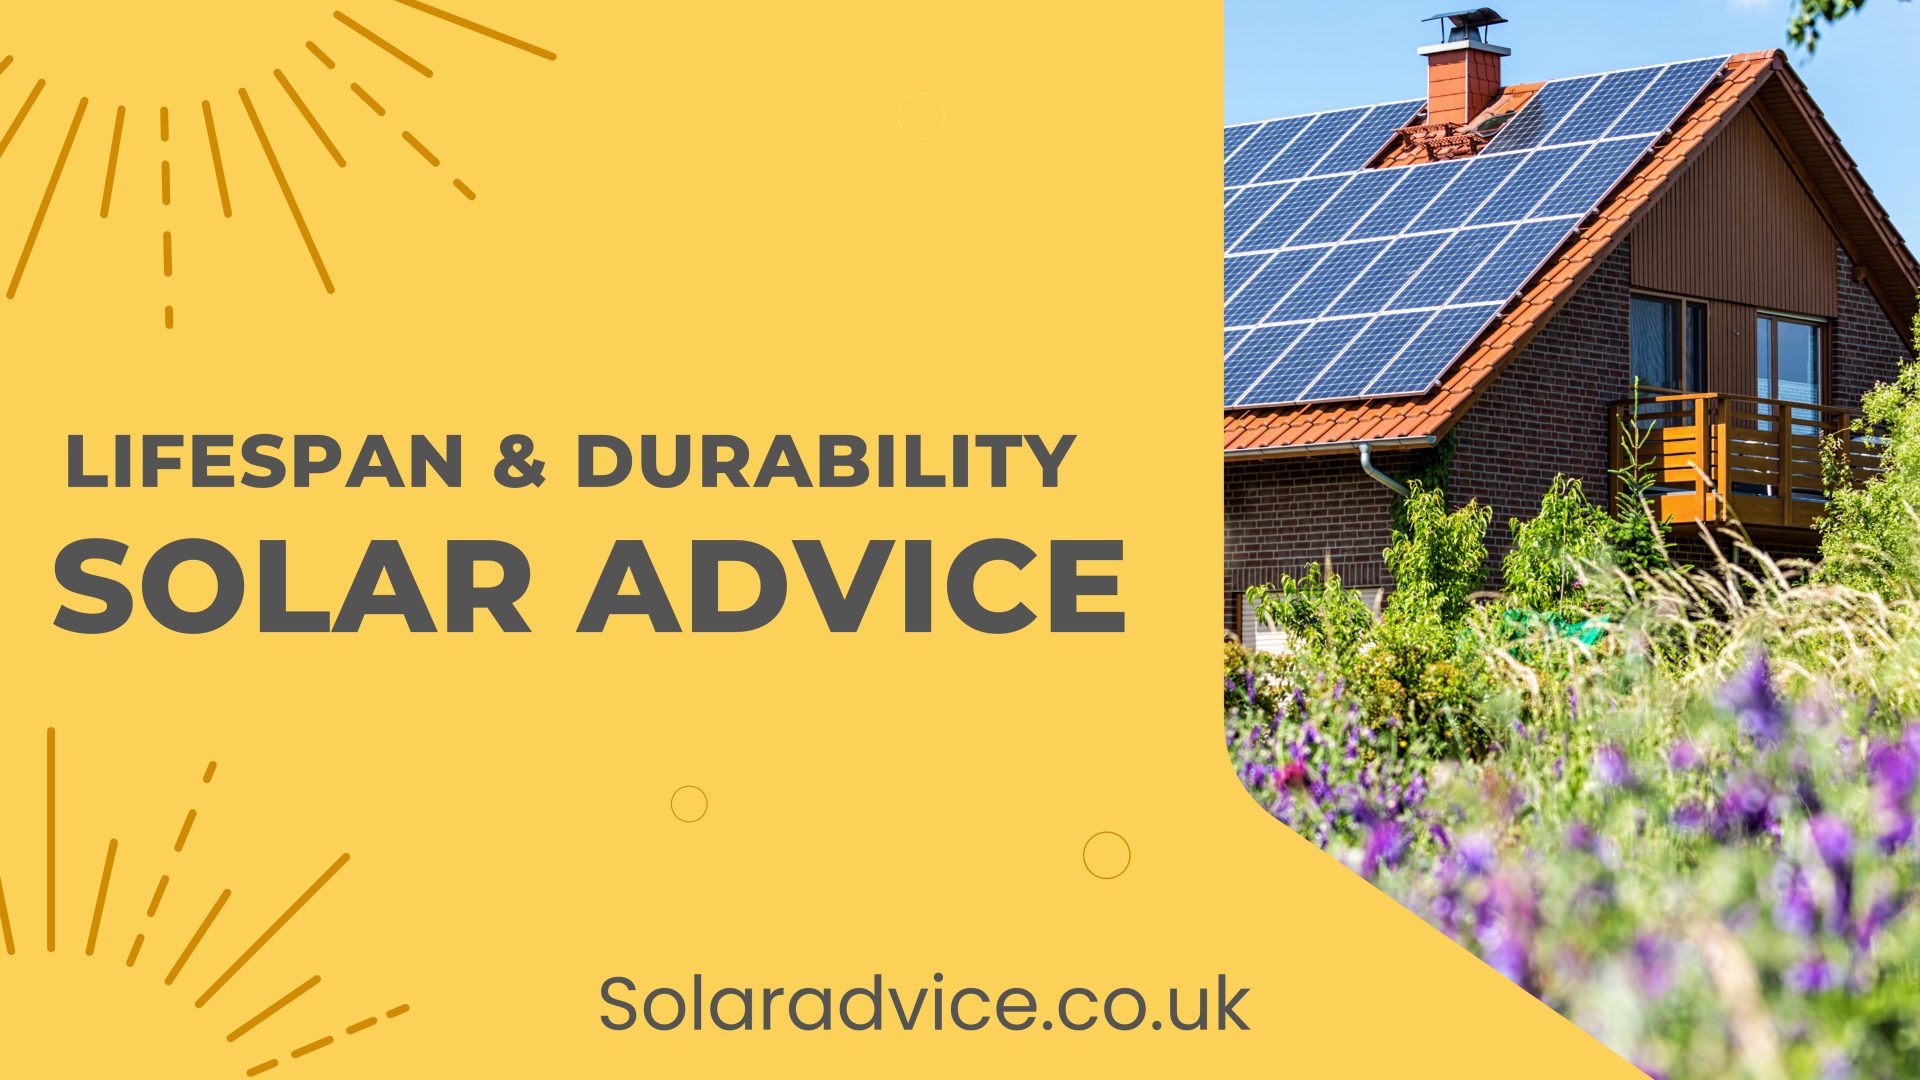 Lifespan and durability of solar panels